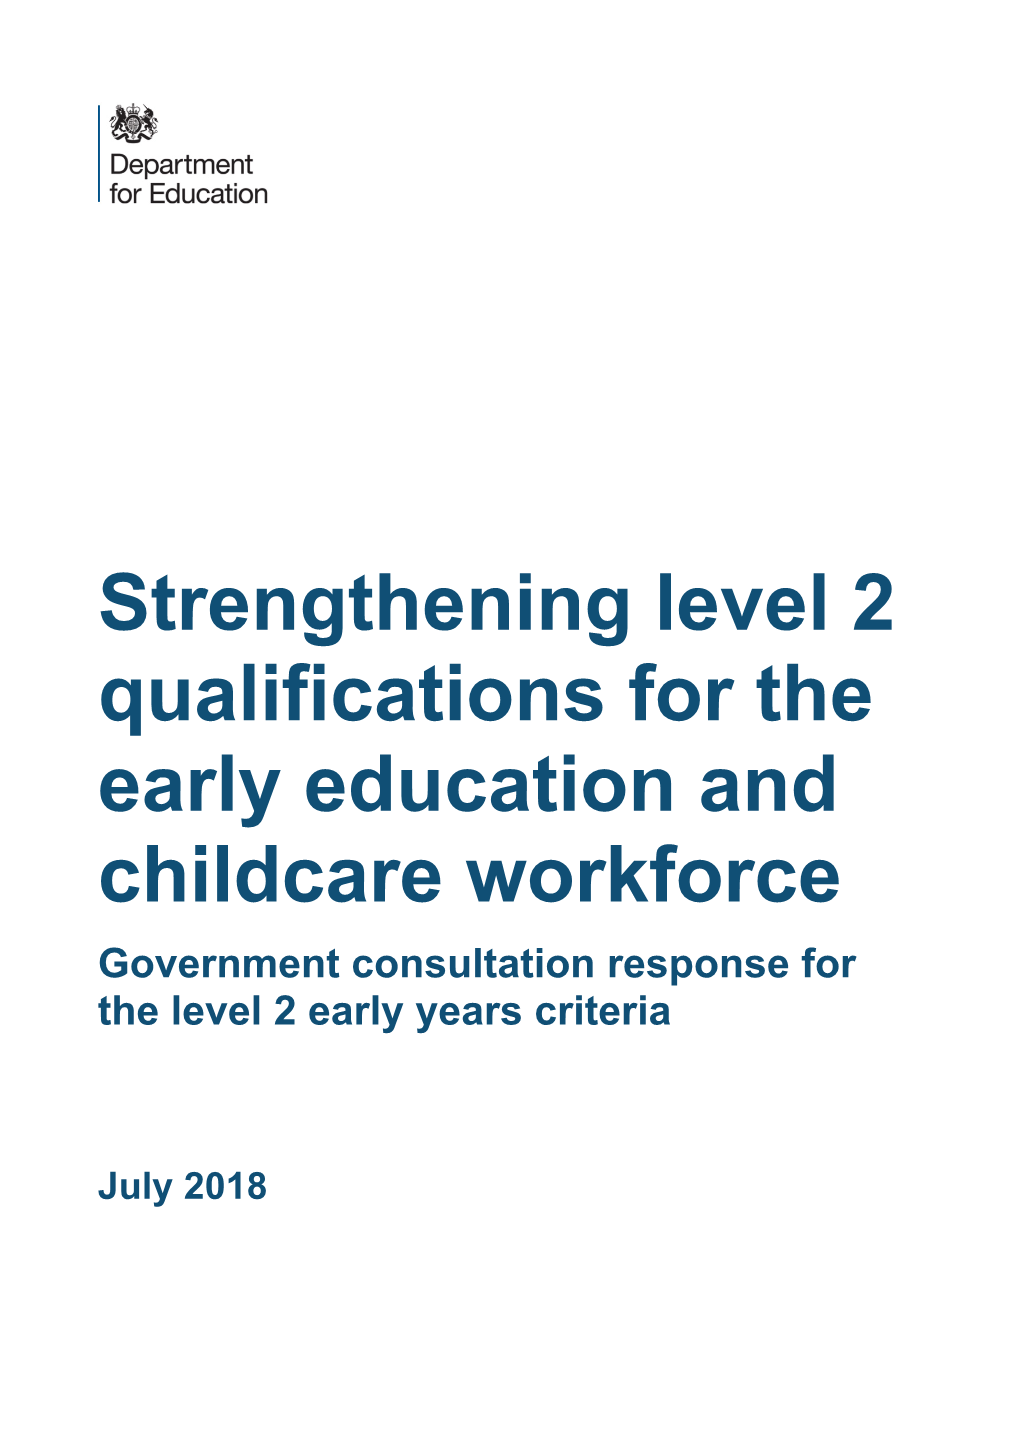 Strengthening Level 2 Qualifications for the Early Education and Childcare Workforce Government Consultation Response for the Level 2 Early Years Criteria